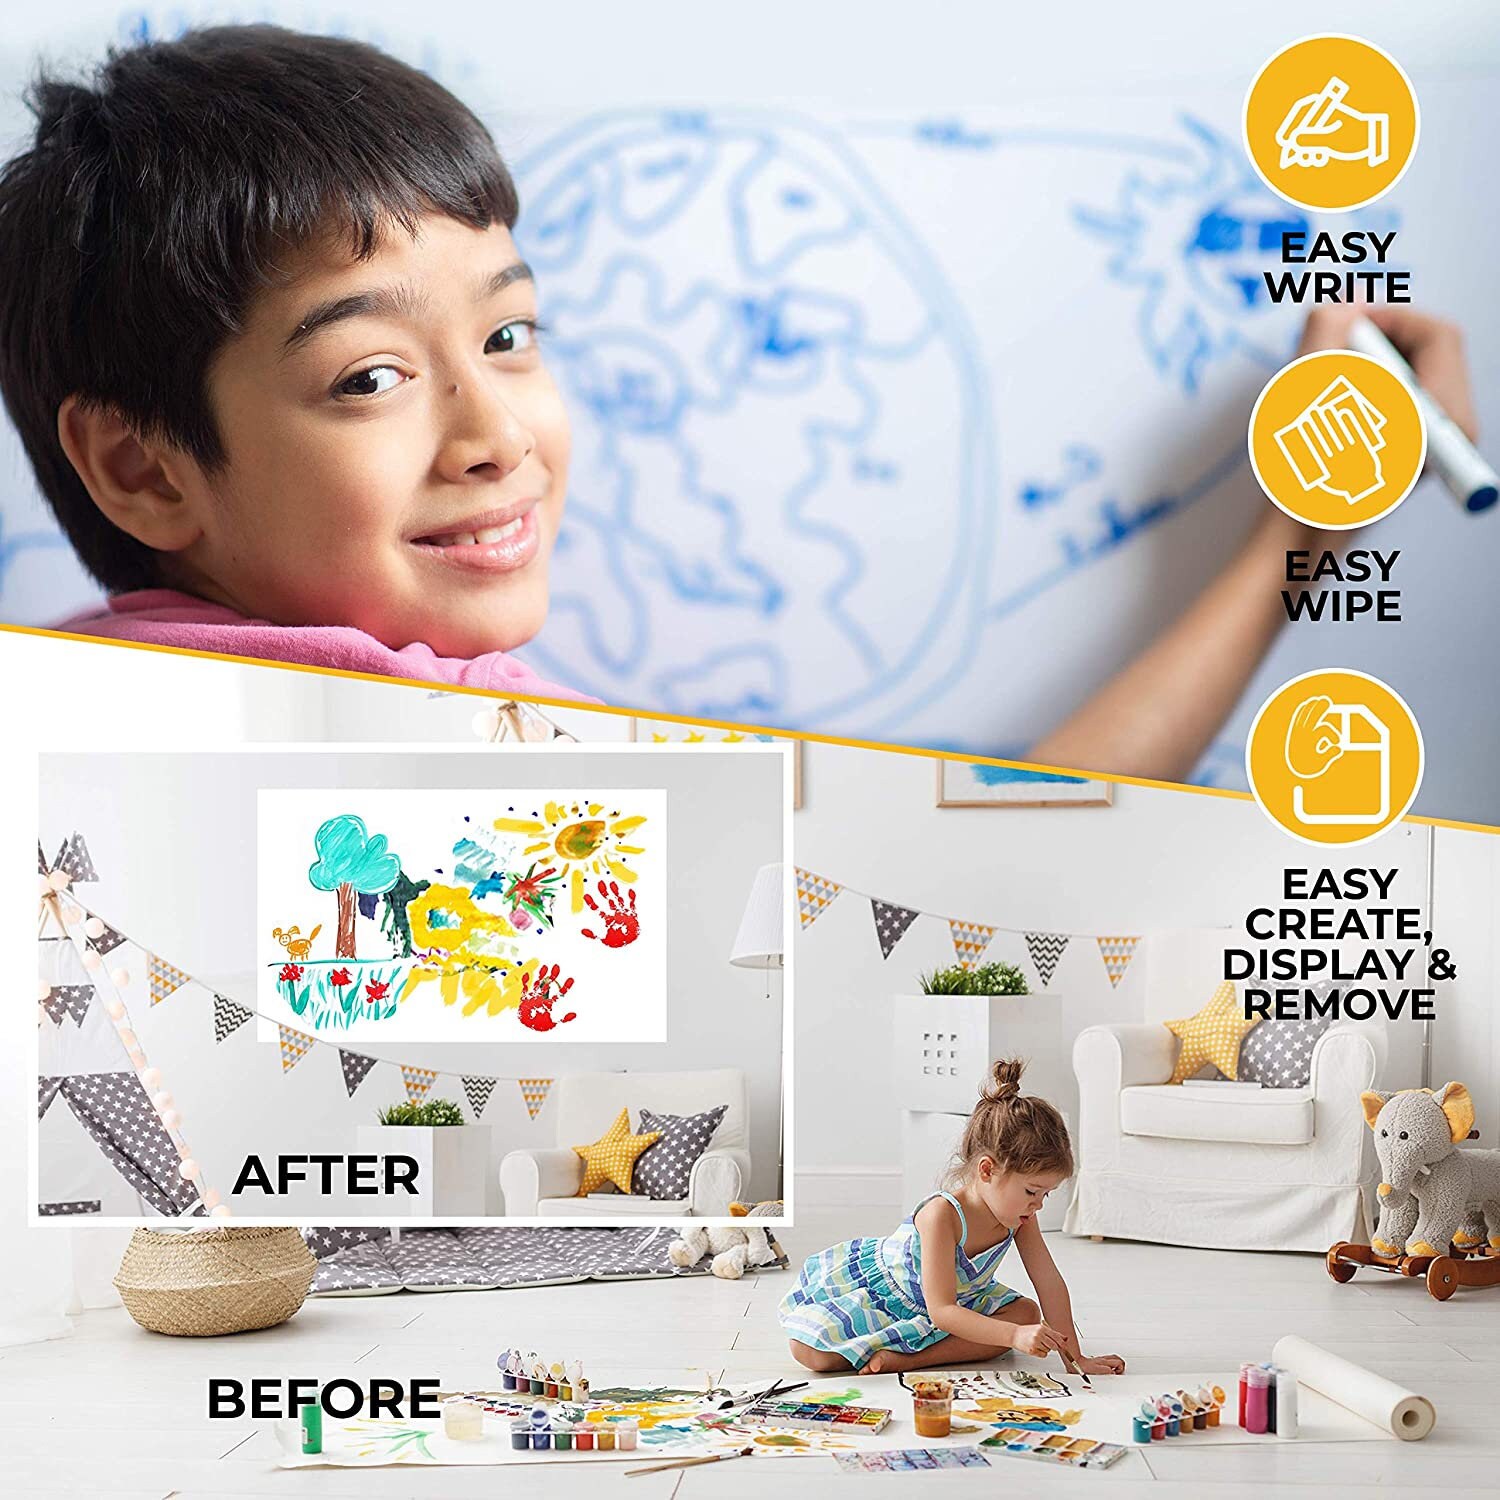 Clingers Dry Erase Kids Cling-rite Rolls, Portable Whiteboard, 50' ft roll,  Sheet Size 20x30 for Kids Drawing and Planning, School, Arts and Crafts